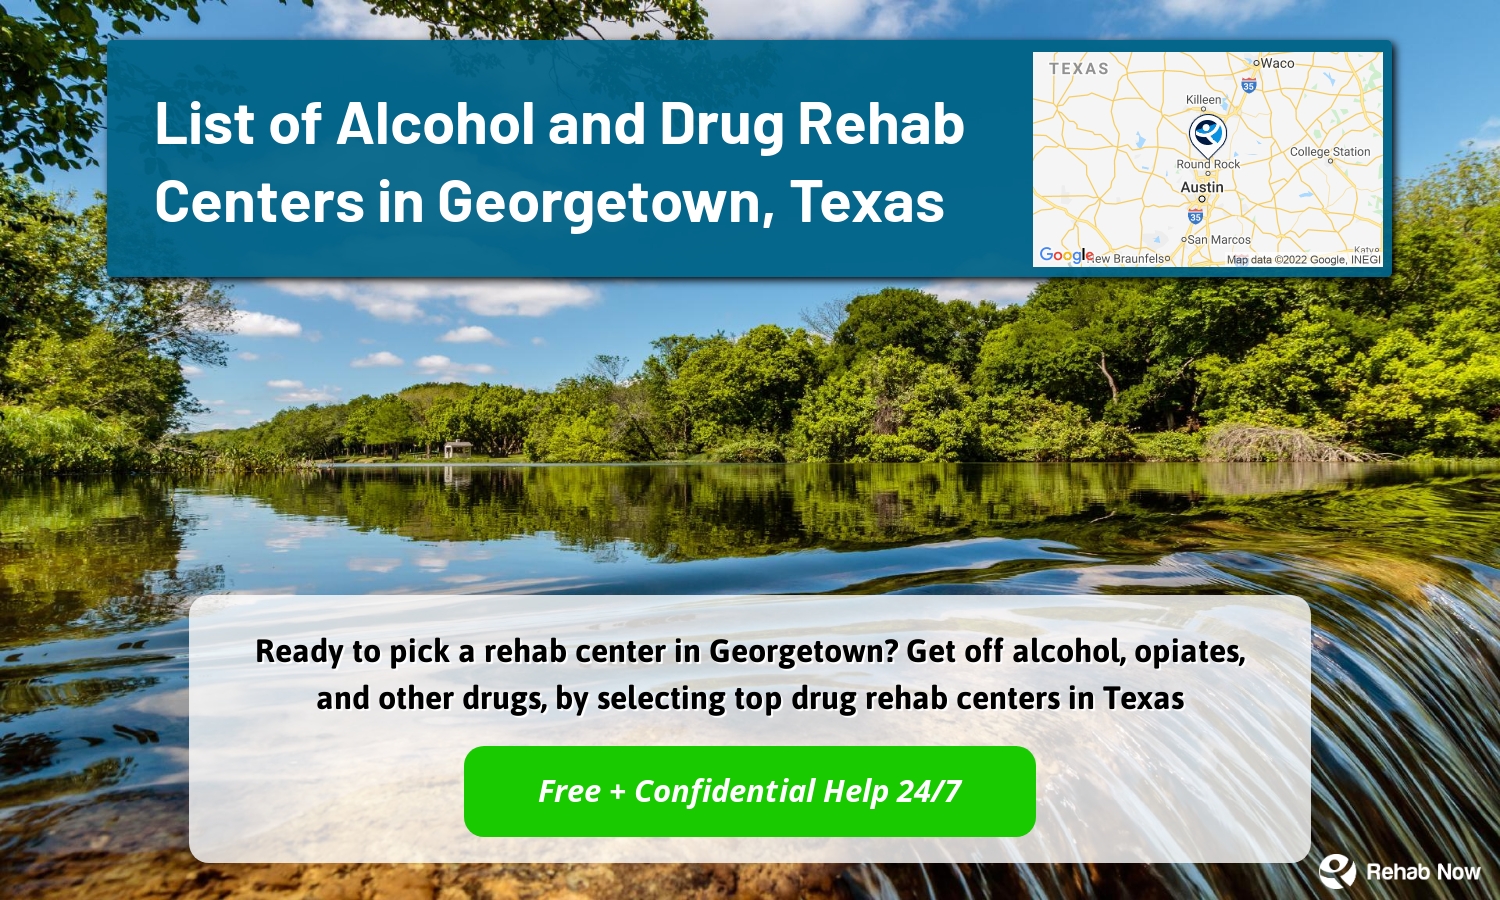 Ready to pick a rehab center in Georgetown? Get off alcohol, opiates, and other drugs, by selecting top drug rehab centers in Texas